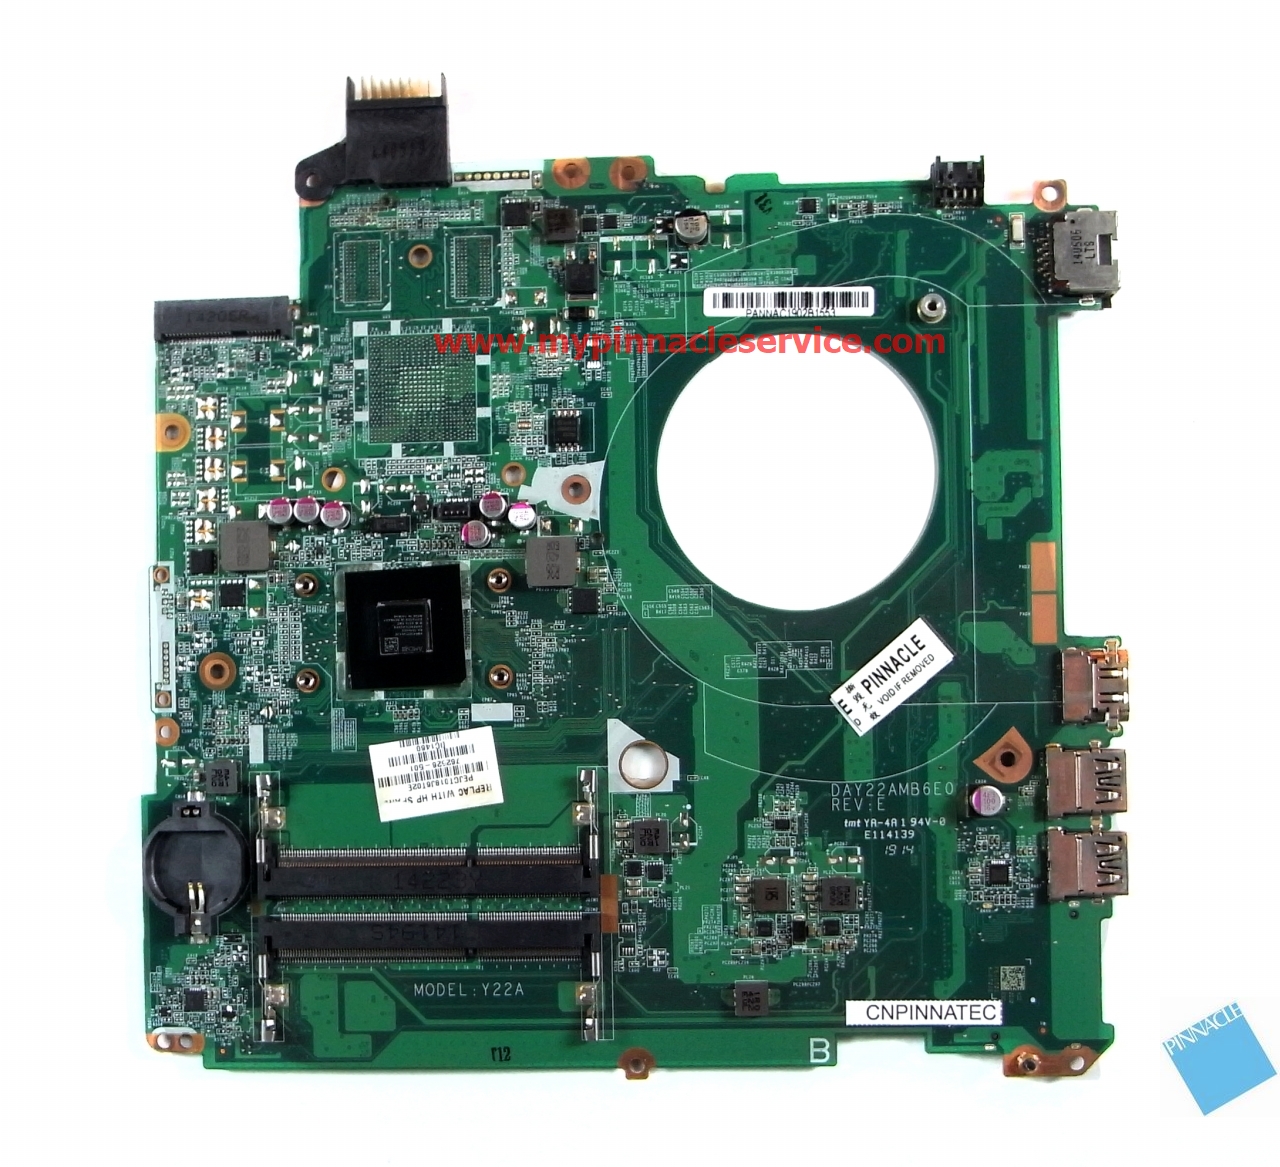 762526-501-a8-6410-motherboard-for-hp-pavilion-15-p-day22amb6e0-rimg0222.jpg